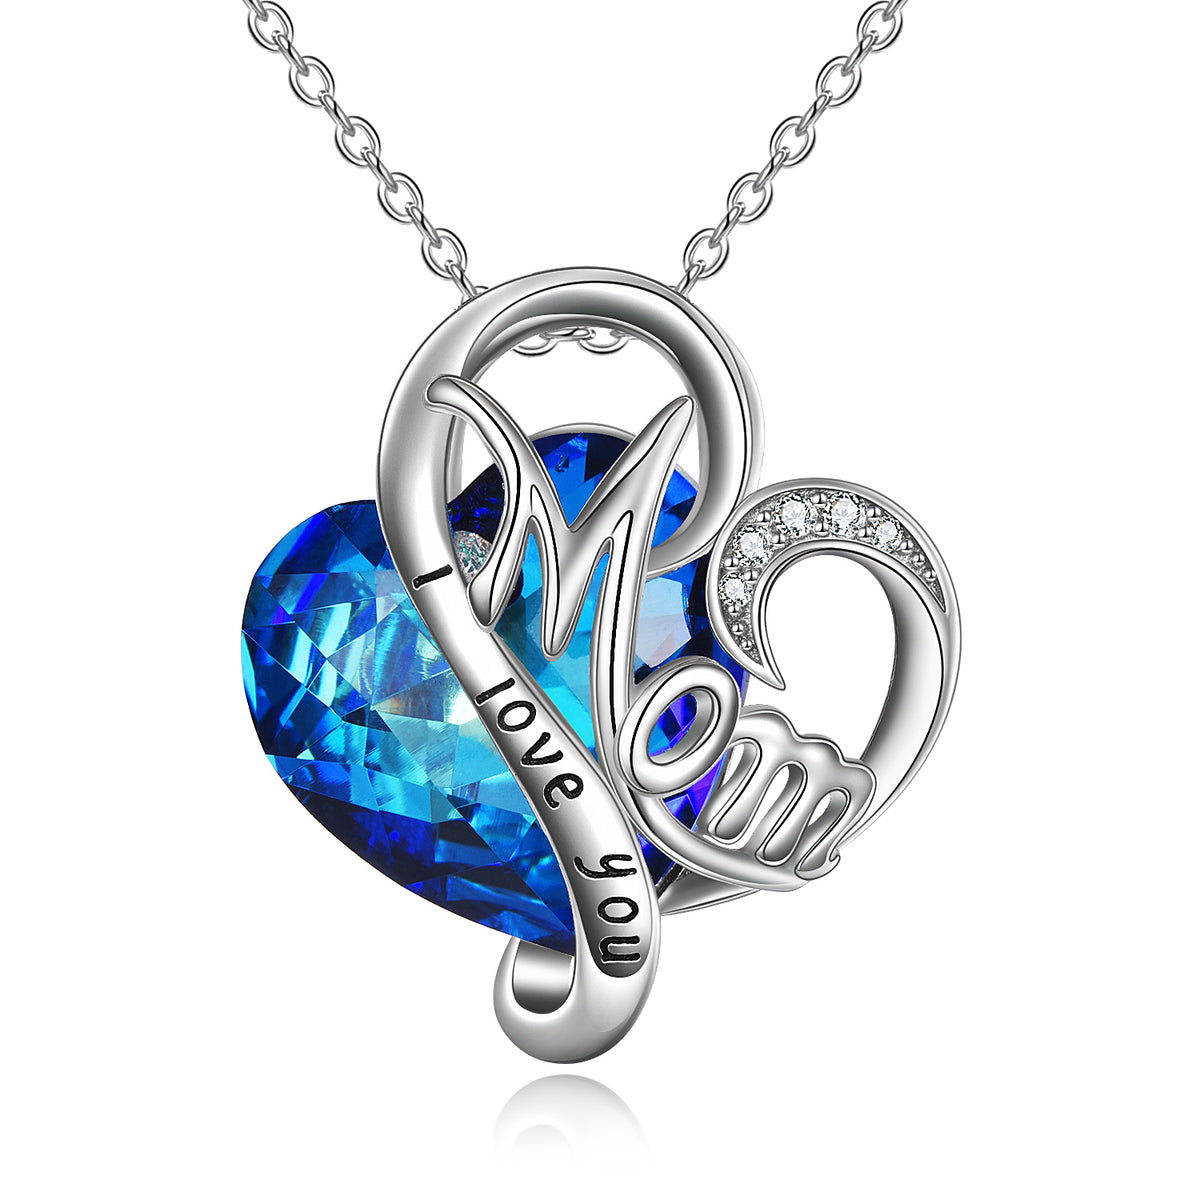 Mom Necklace 925 Sterling Silver with Blue Heart Crystals Mothers Jewelry Gifts Angelwarriorfitness.com